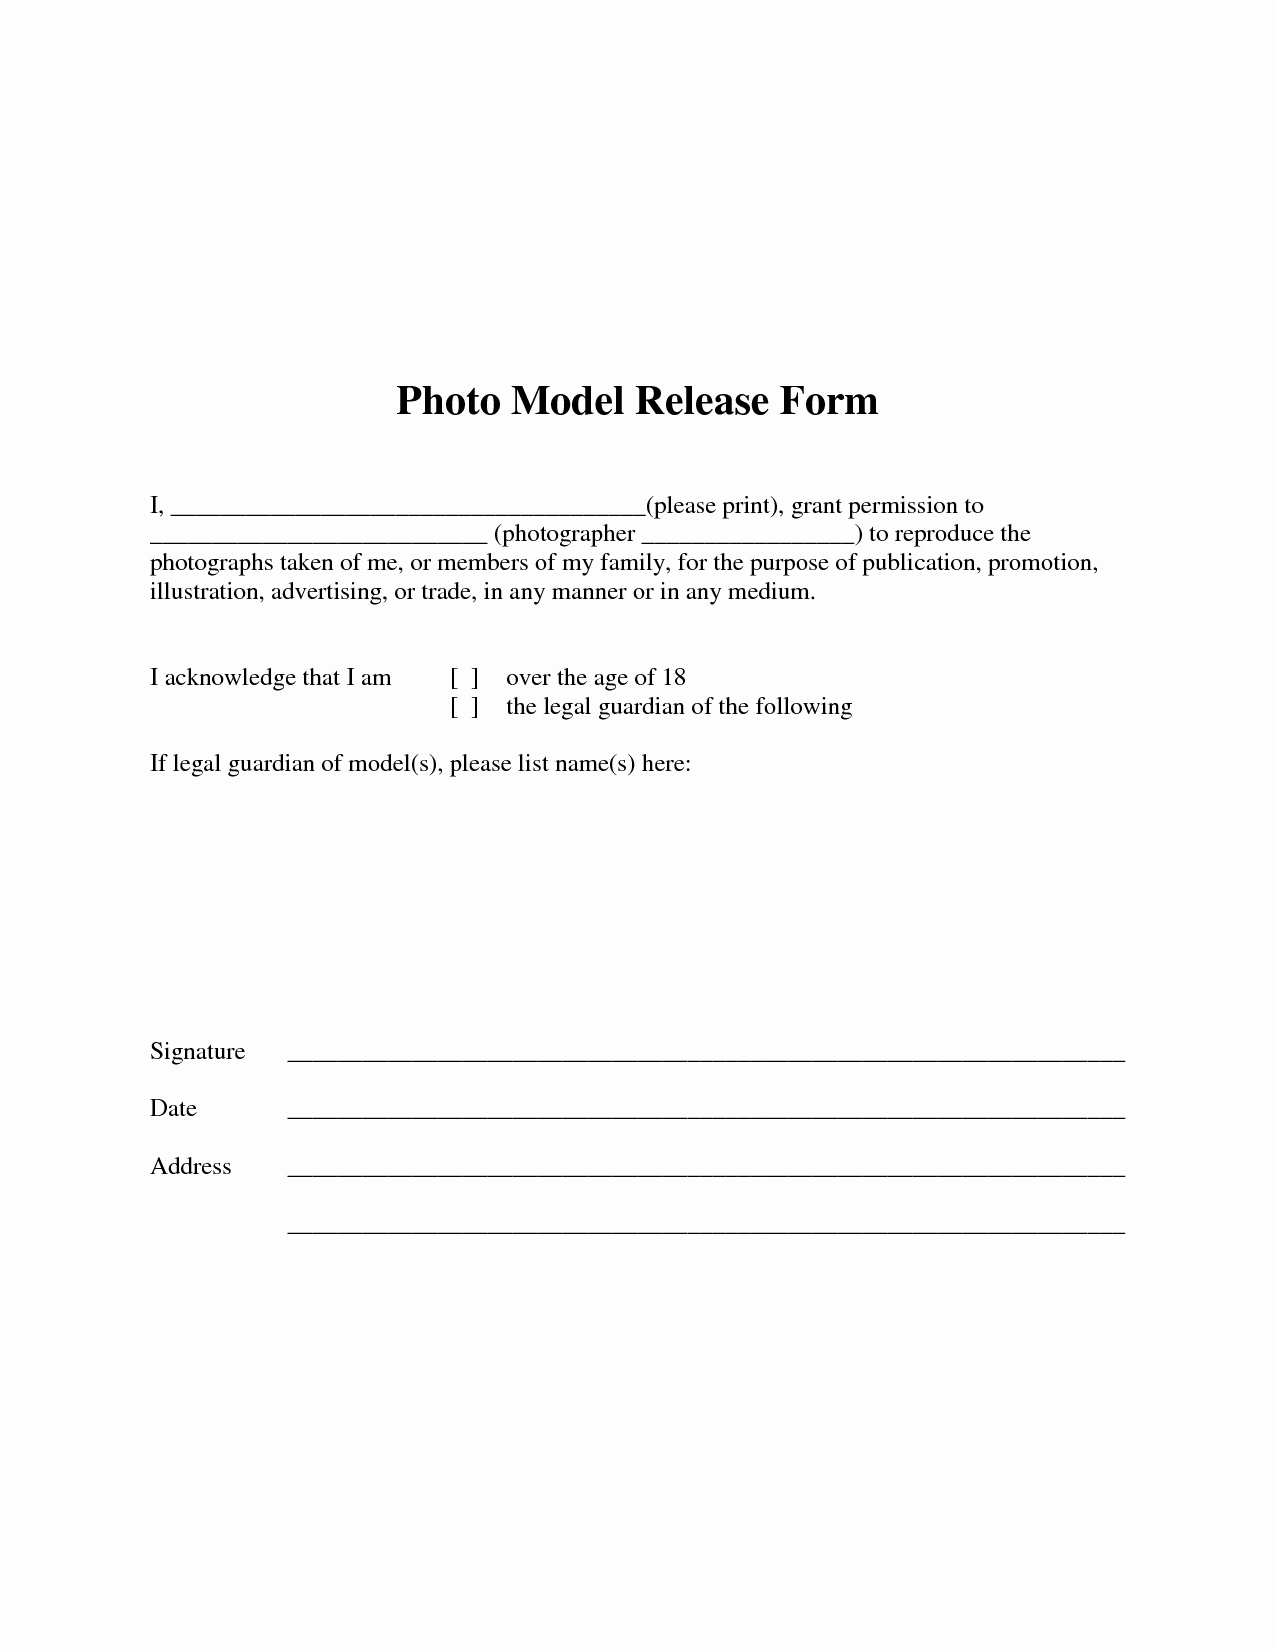 Photo Release form Template Fresh Model Release form Template